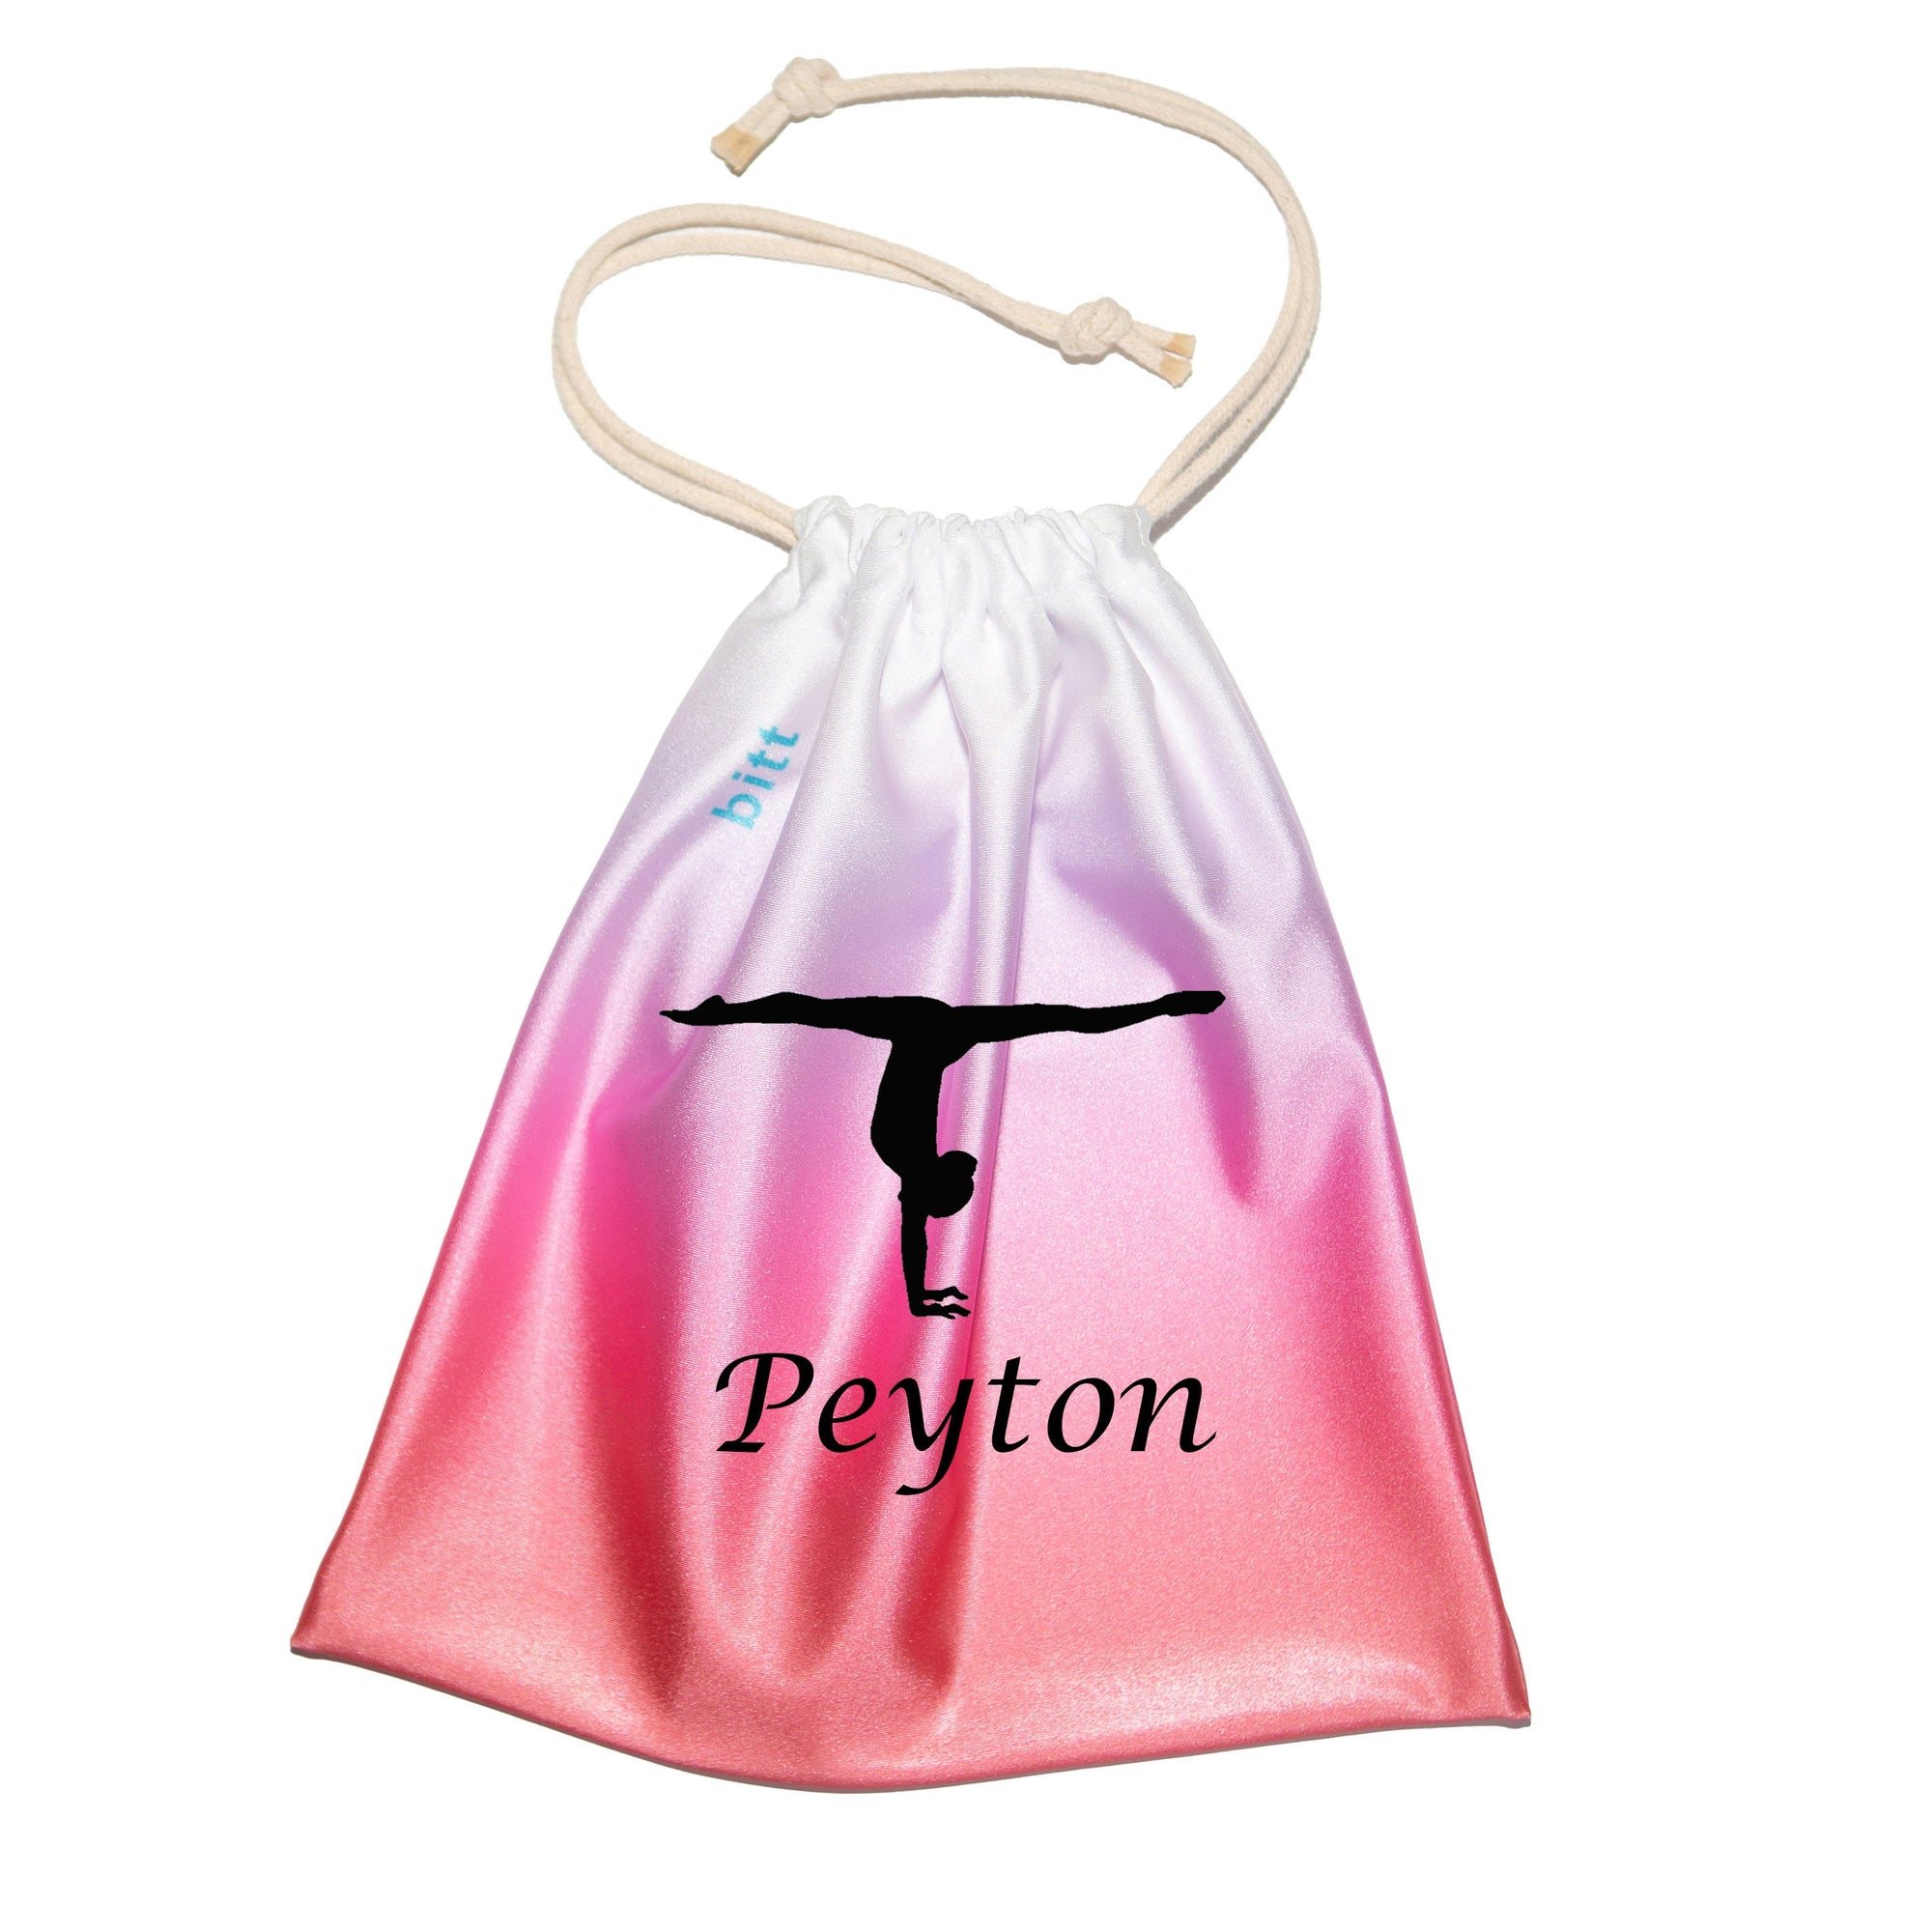 Personlized Gymnastics Grip Bag with Handstand in Coral, Purple, White Ombre